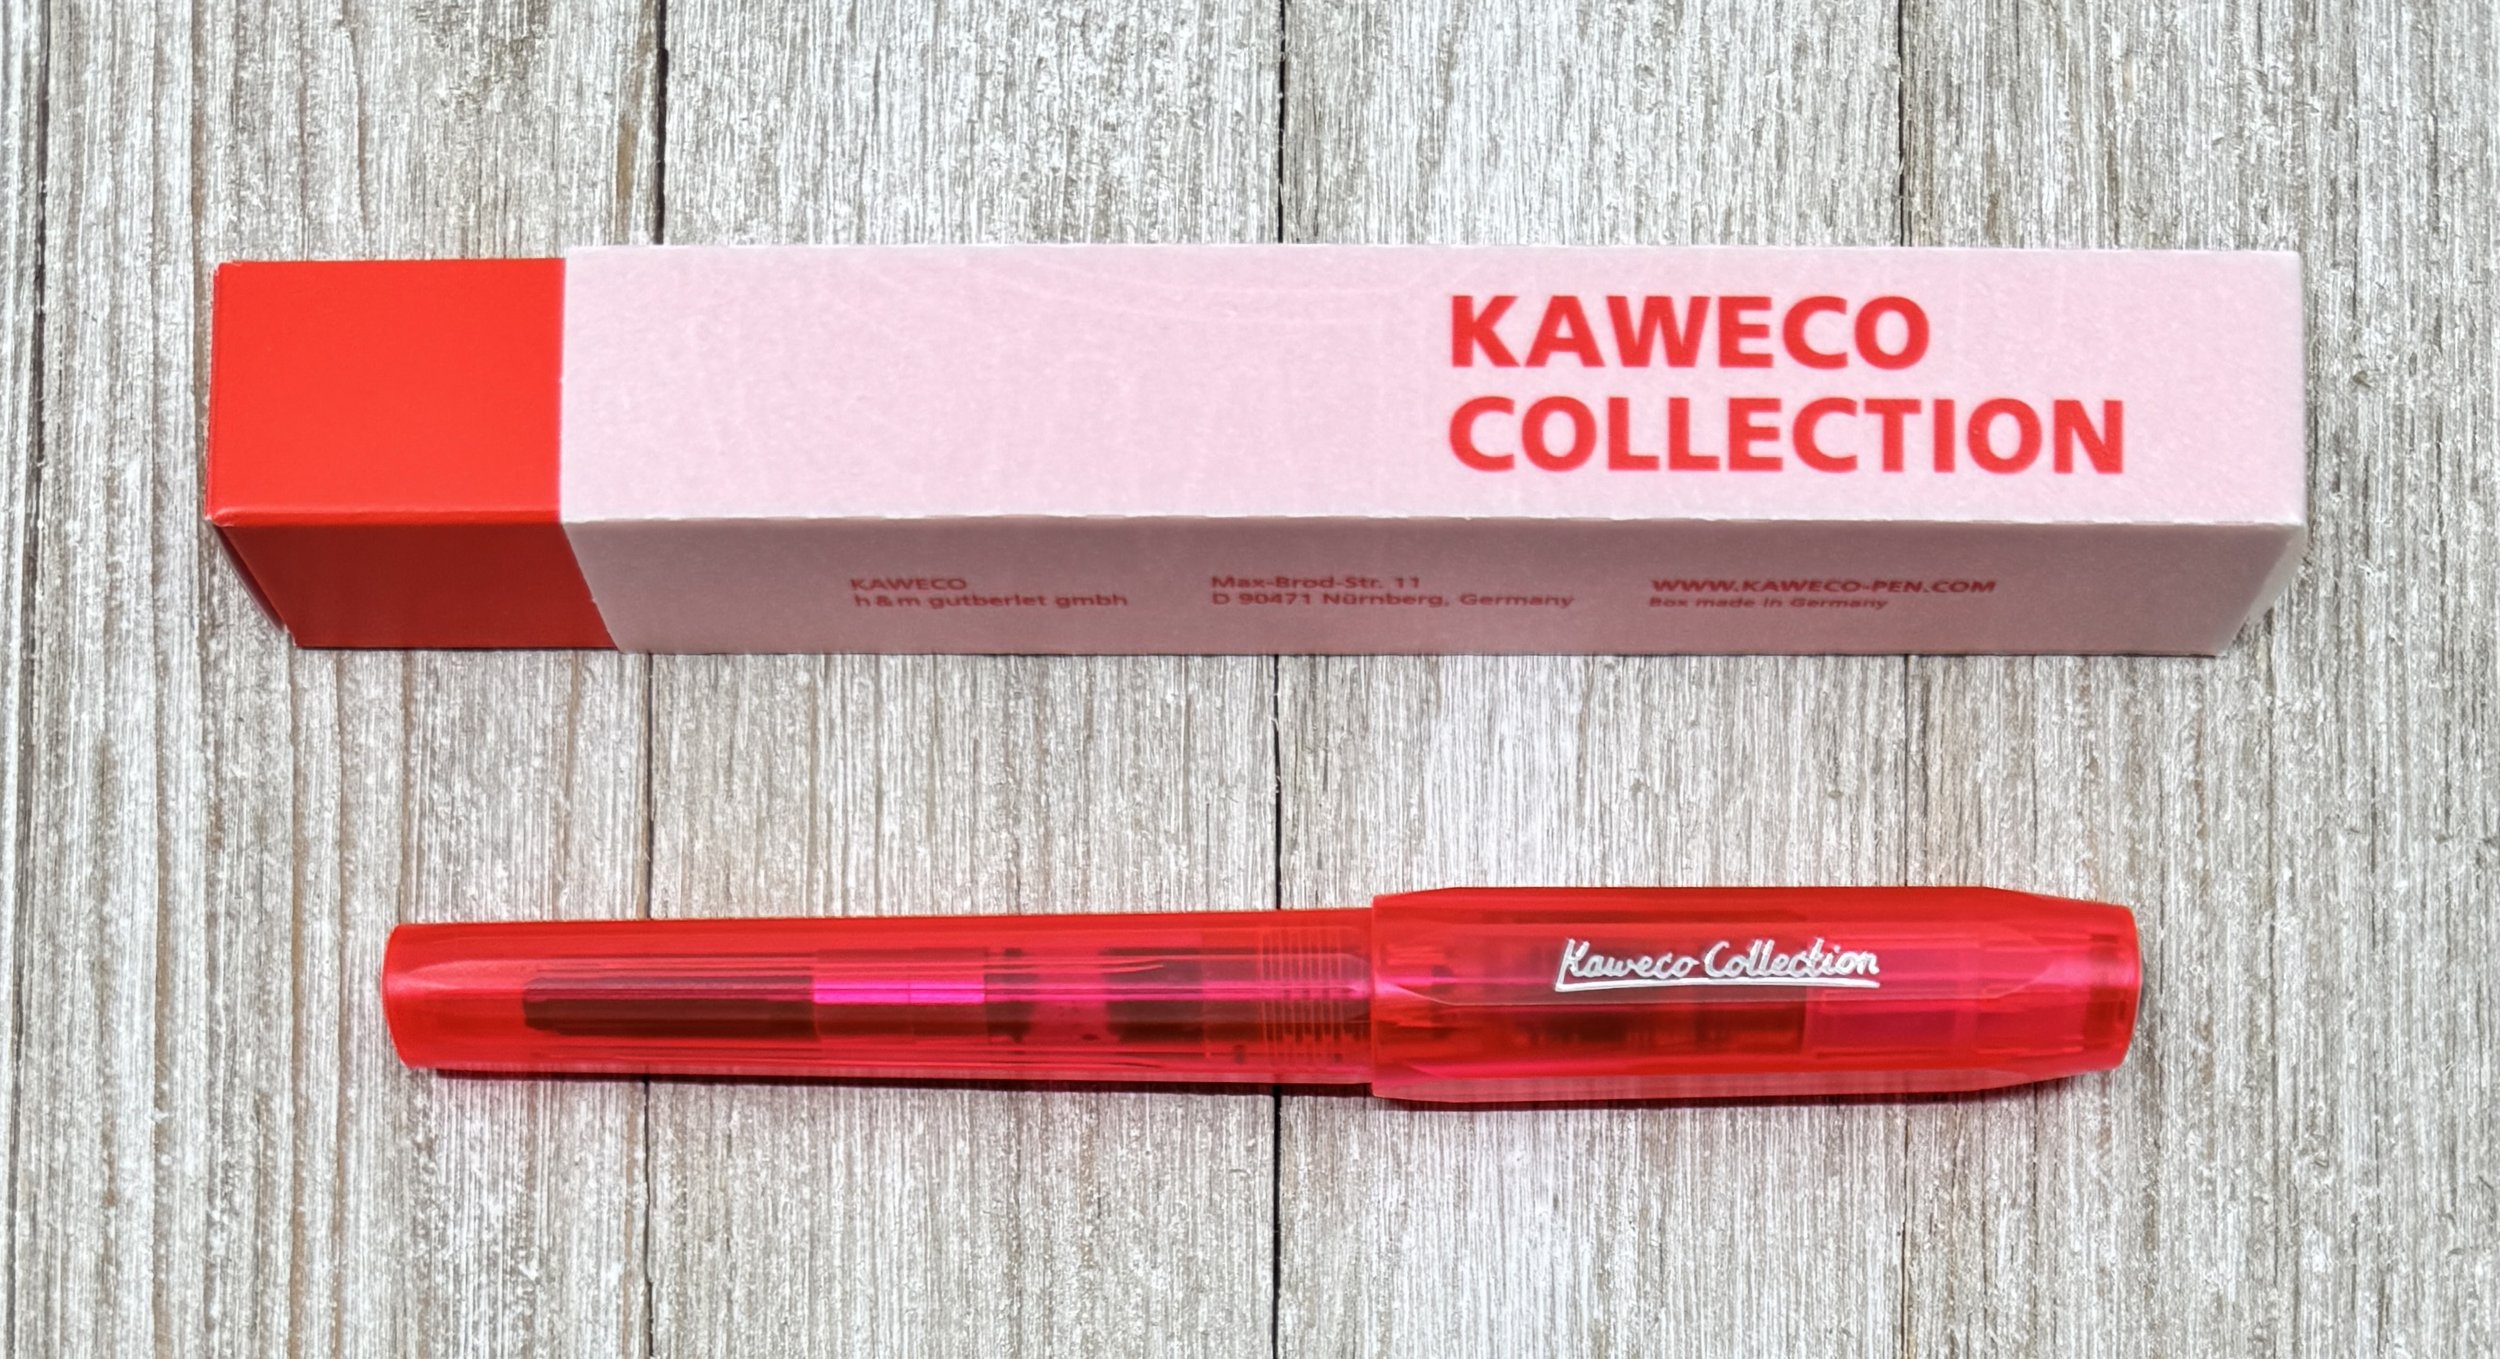 Review: Kaweco Leather Pen Holder - The Well-Appointed Desk